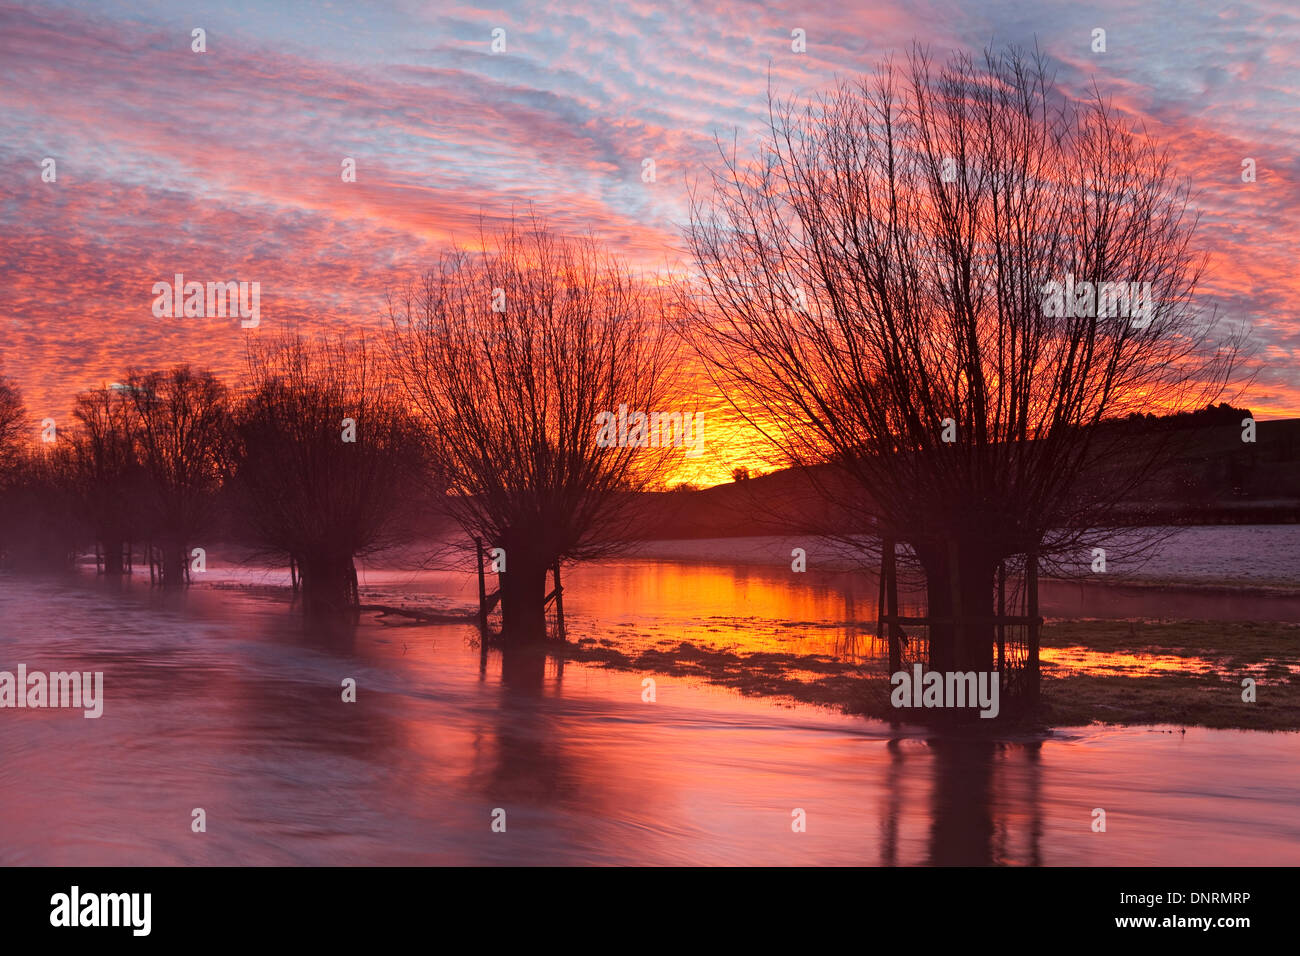 Salisbury, UK. 5th Jan, 2014, Following heavy rain dawn is reflected in flood water on the River Ebble near Salisbury Wiltshire. With further heavy rain forecast the red sky justifies the old saying 'red sky in the morning shepherds warning'. Credit:  Ken Leslie/Alamy Live News Stock Photo